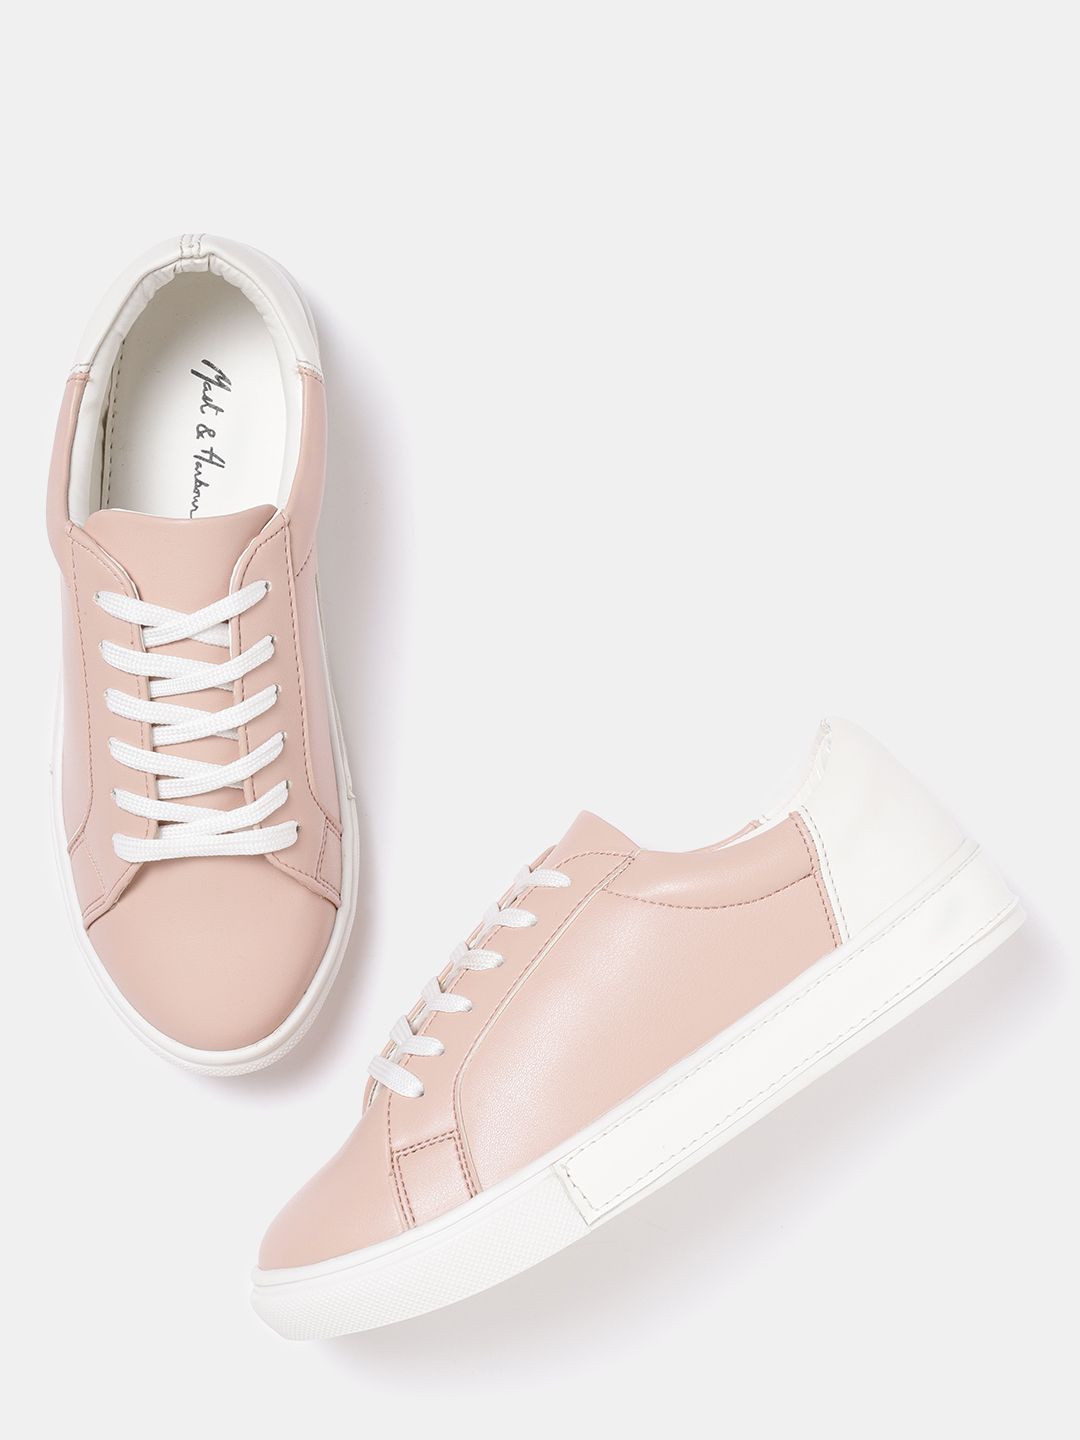 Mast & Harbour Women Dusty Pink Sneakers Price in India